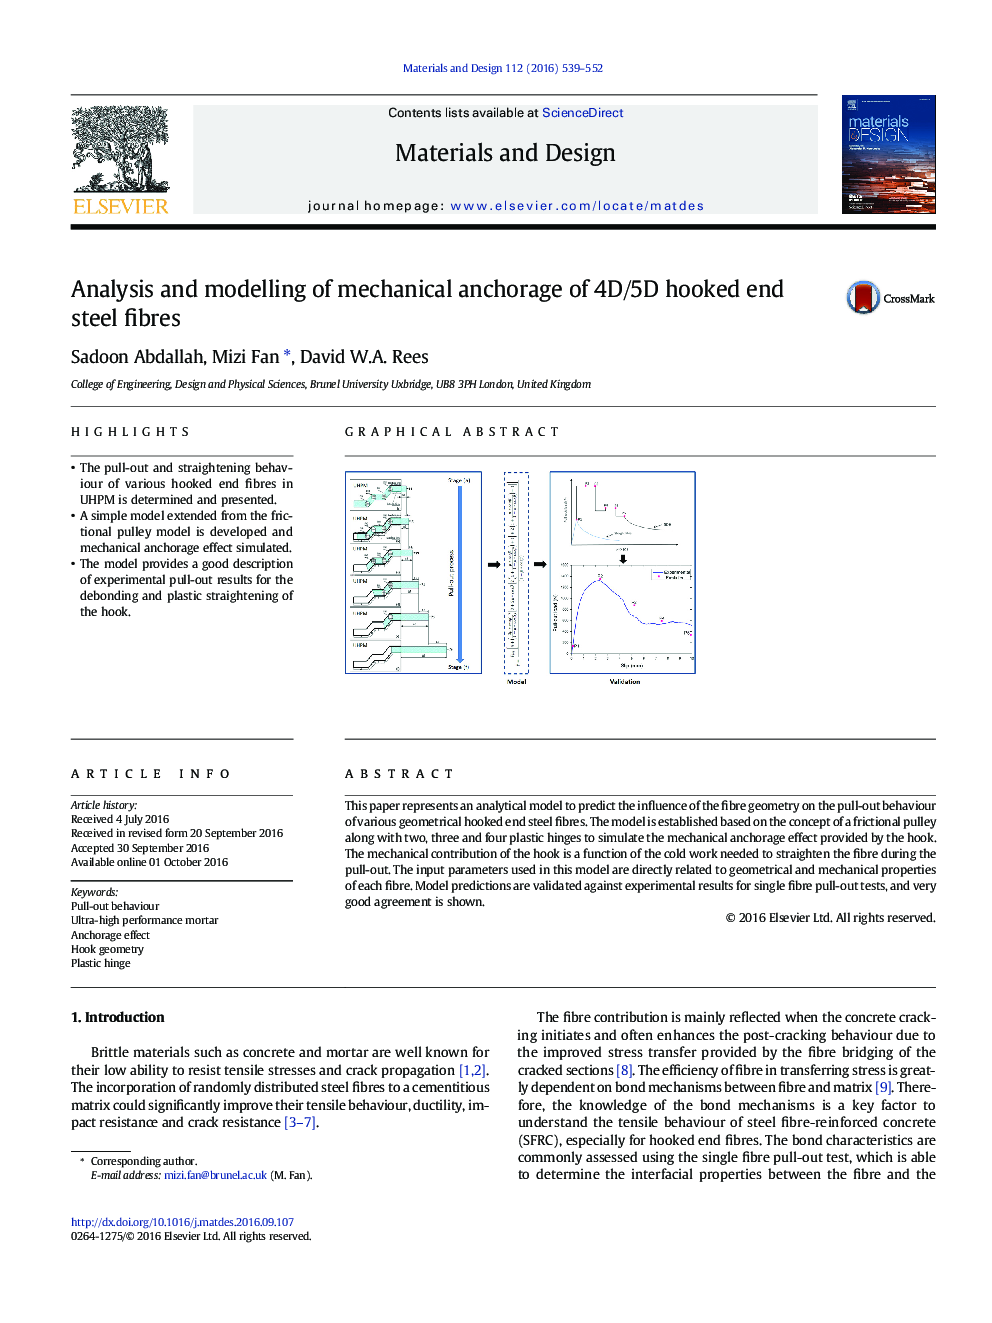 Analysis and modelling of mechanical anchorage of 4D/5D hooked end steel fibres